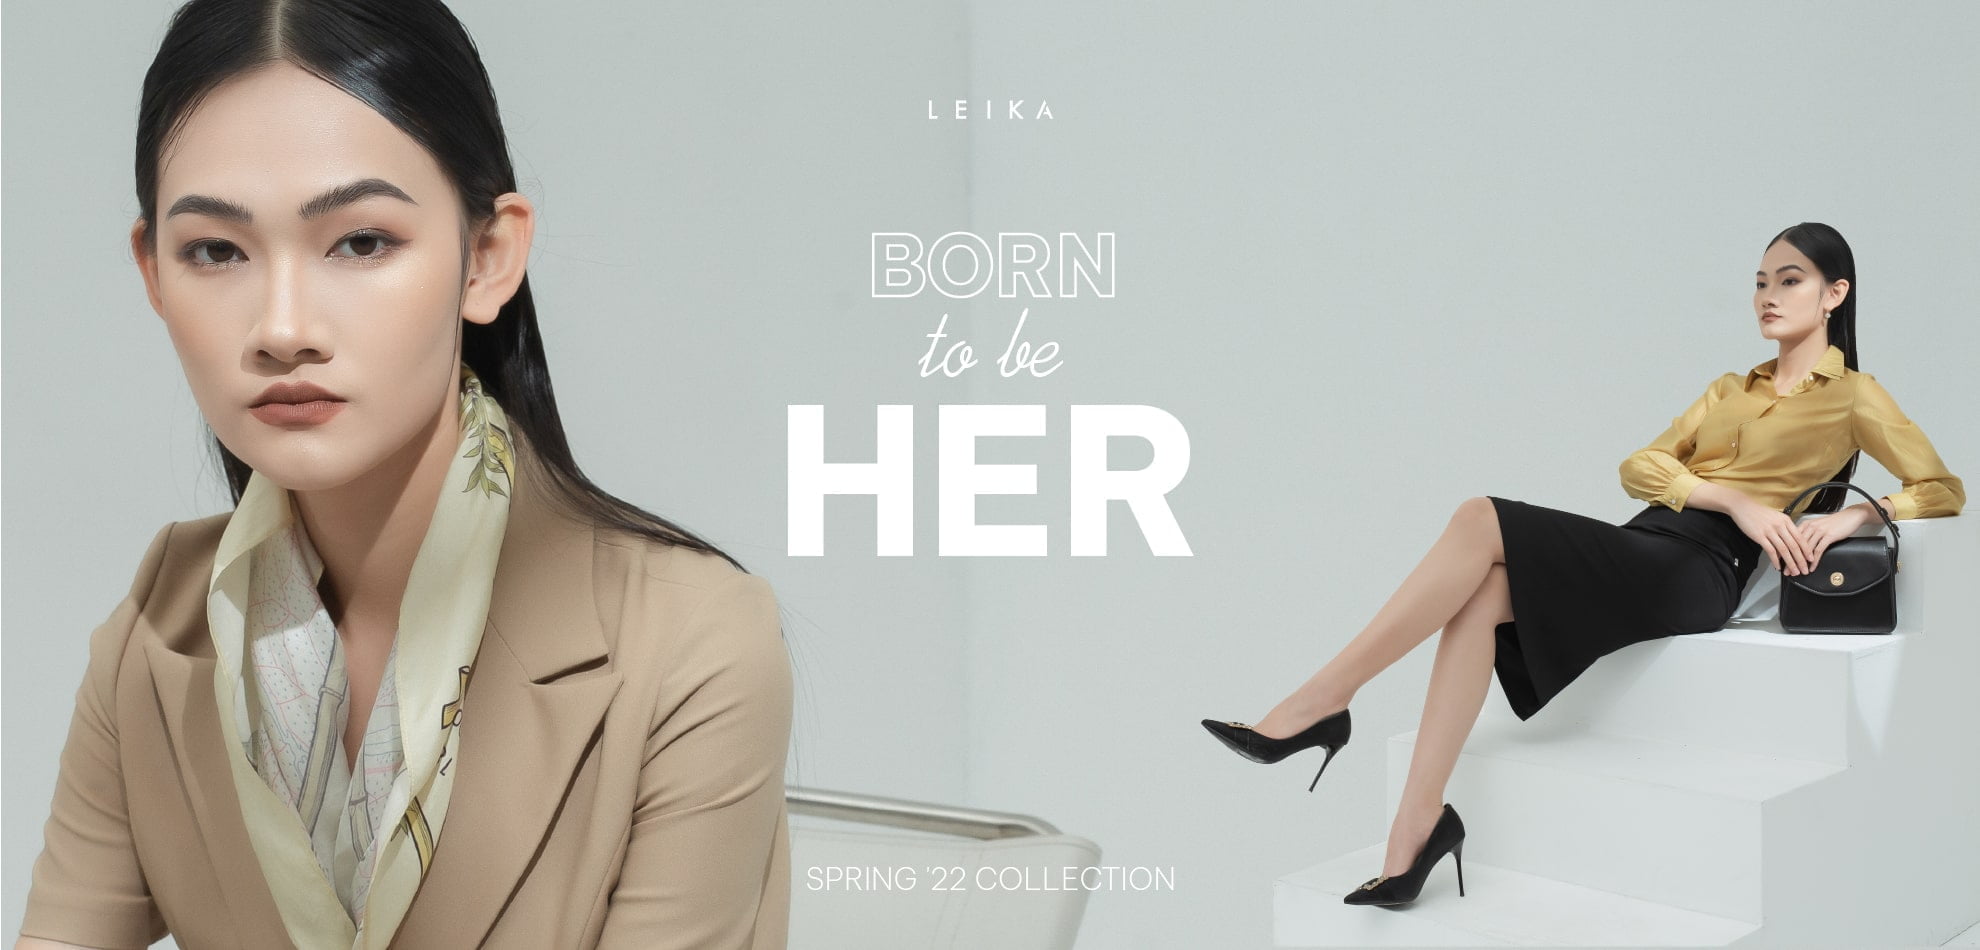 Born to be HER | SPRING '22 COLLECTION - By LEIKA